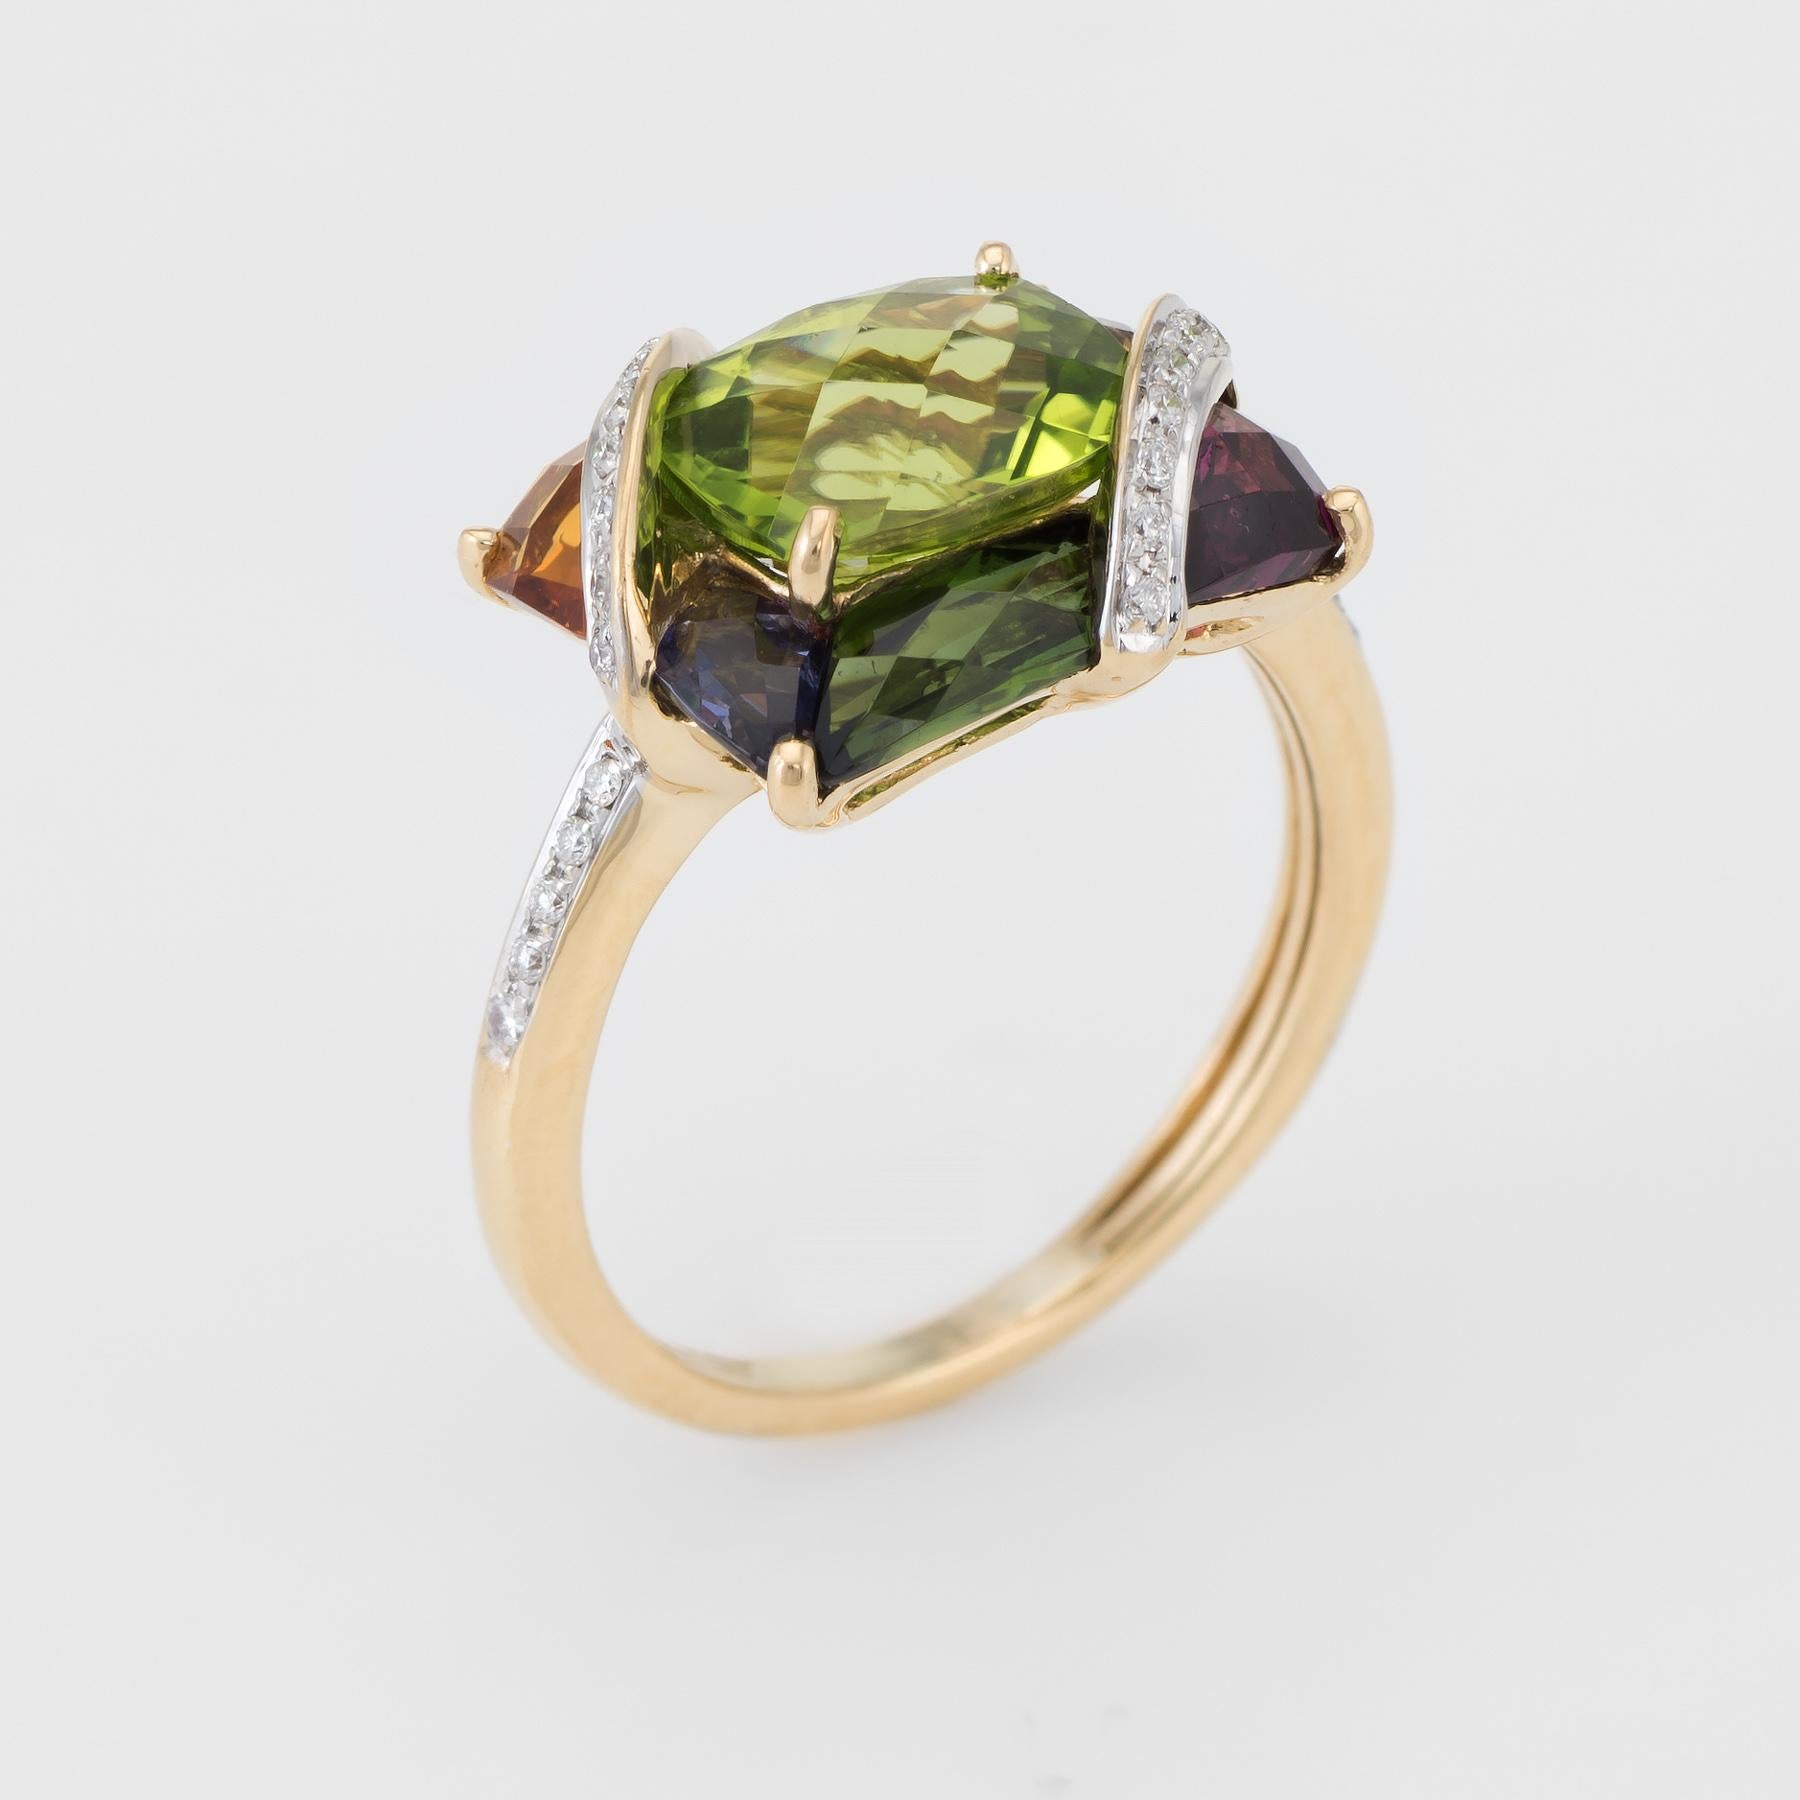 Finely detailed pre owned Bellarri cocktail ring, crafted in 18 karat yellow gold. 

Centrally mounted checkerboard faceted peridot measures 9mm x 7mm (estimated at 2 carats), accented with amethyst, green & pink tourmaline, and citrine. The